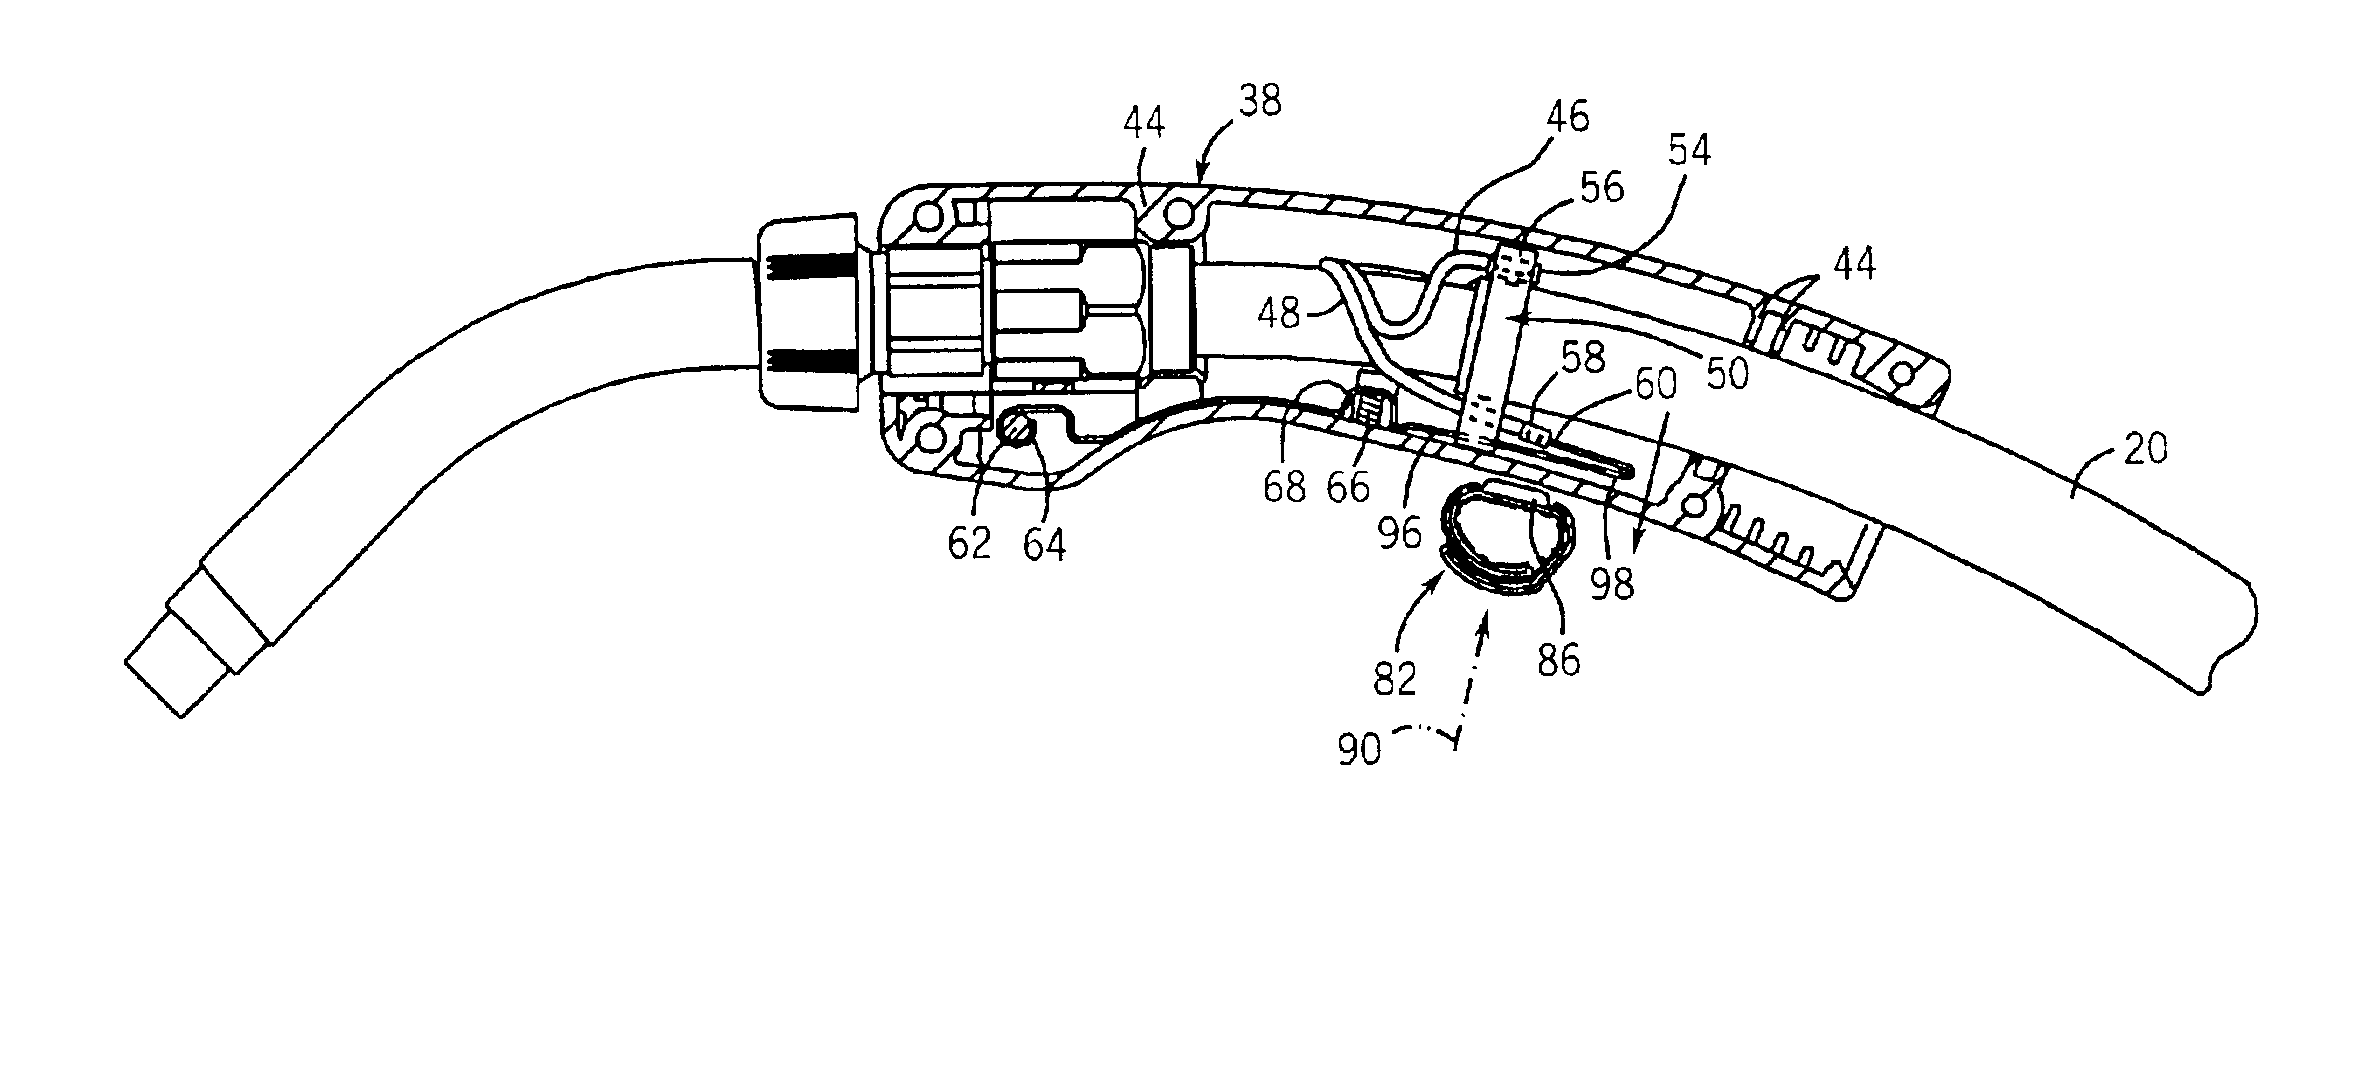 Triggerless welding implement and method of operating same